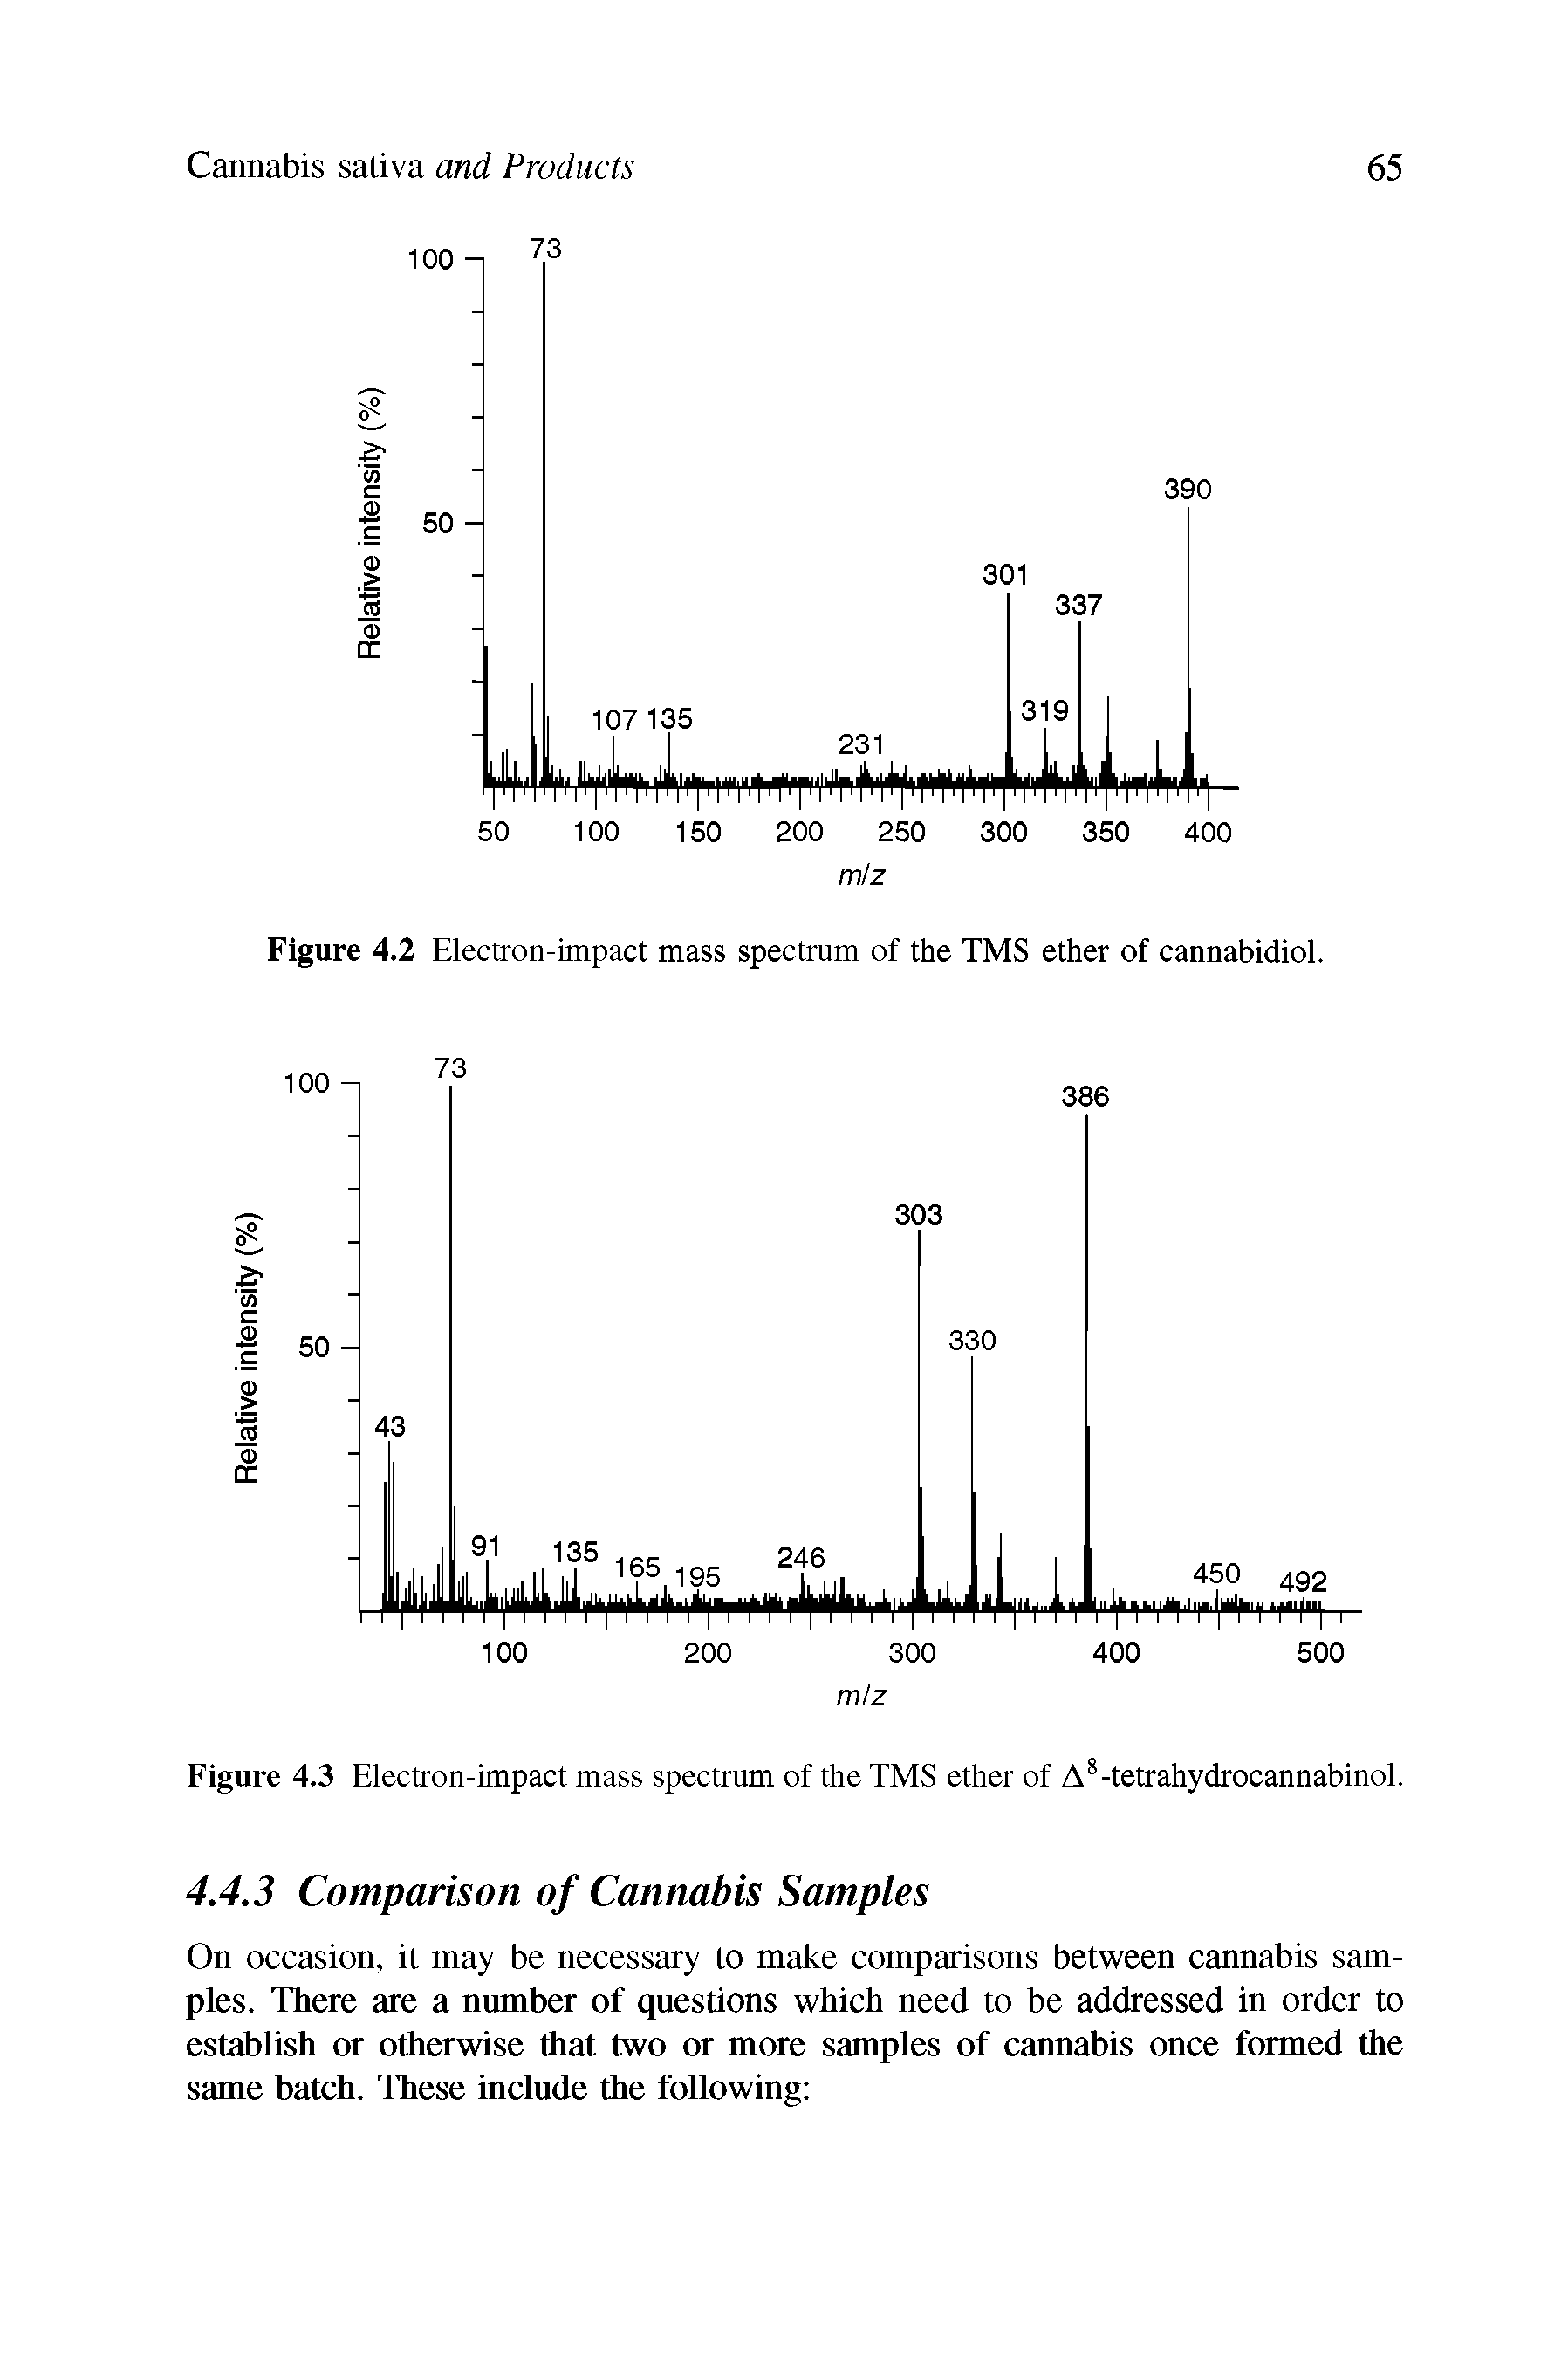 Figure 4.2 Electron-impact mass spectrum of the TMS ether of cannabidiol.